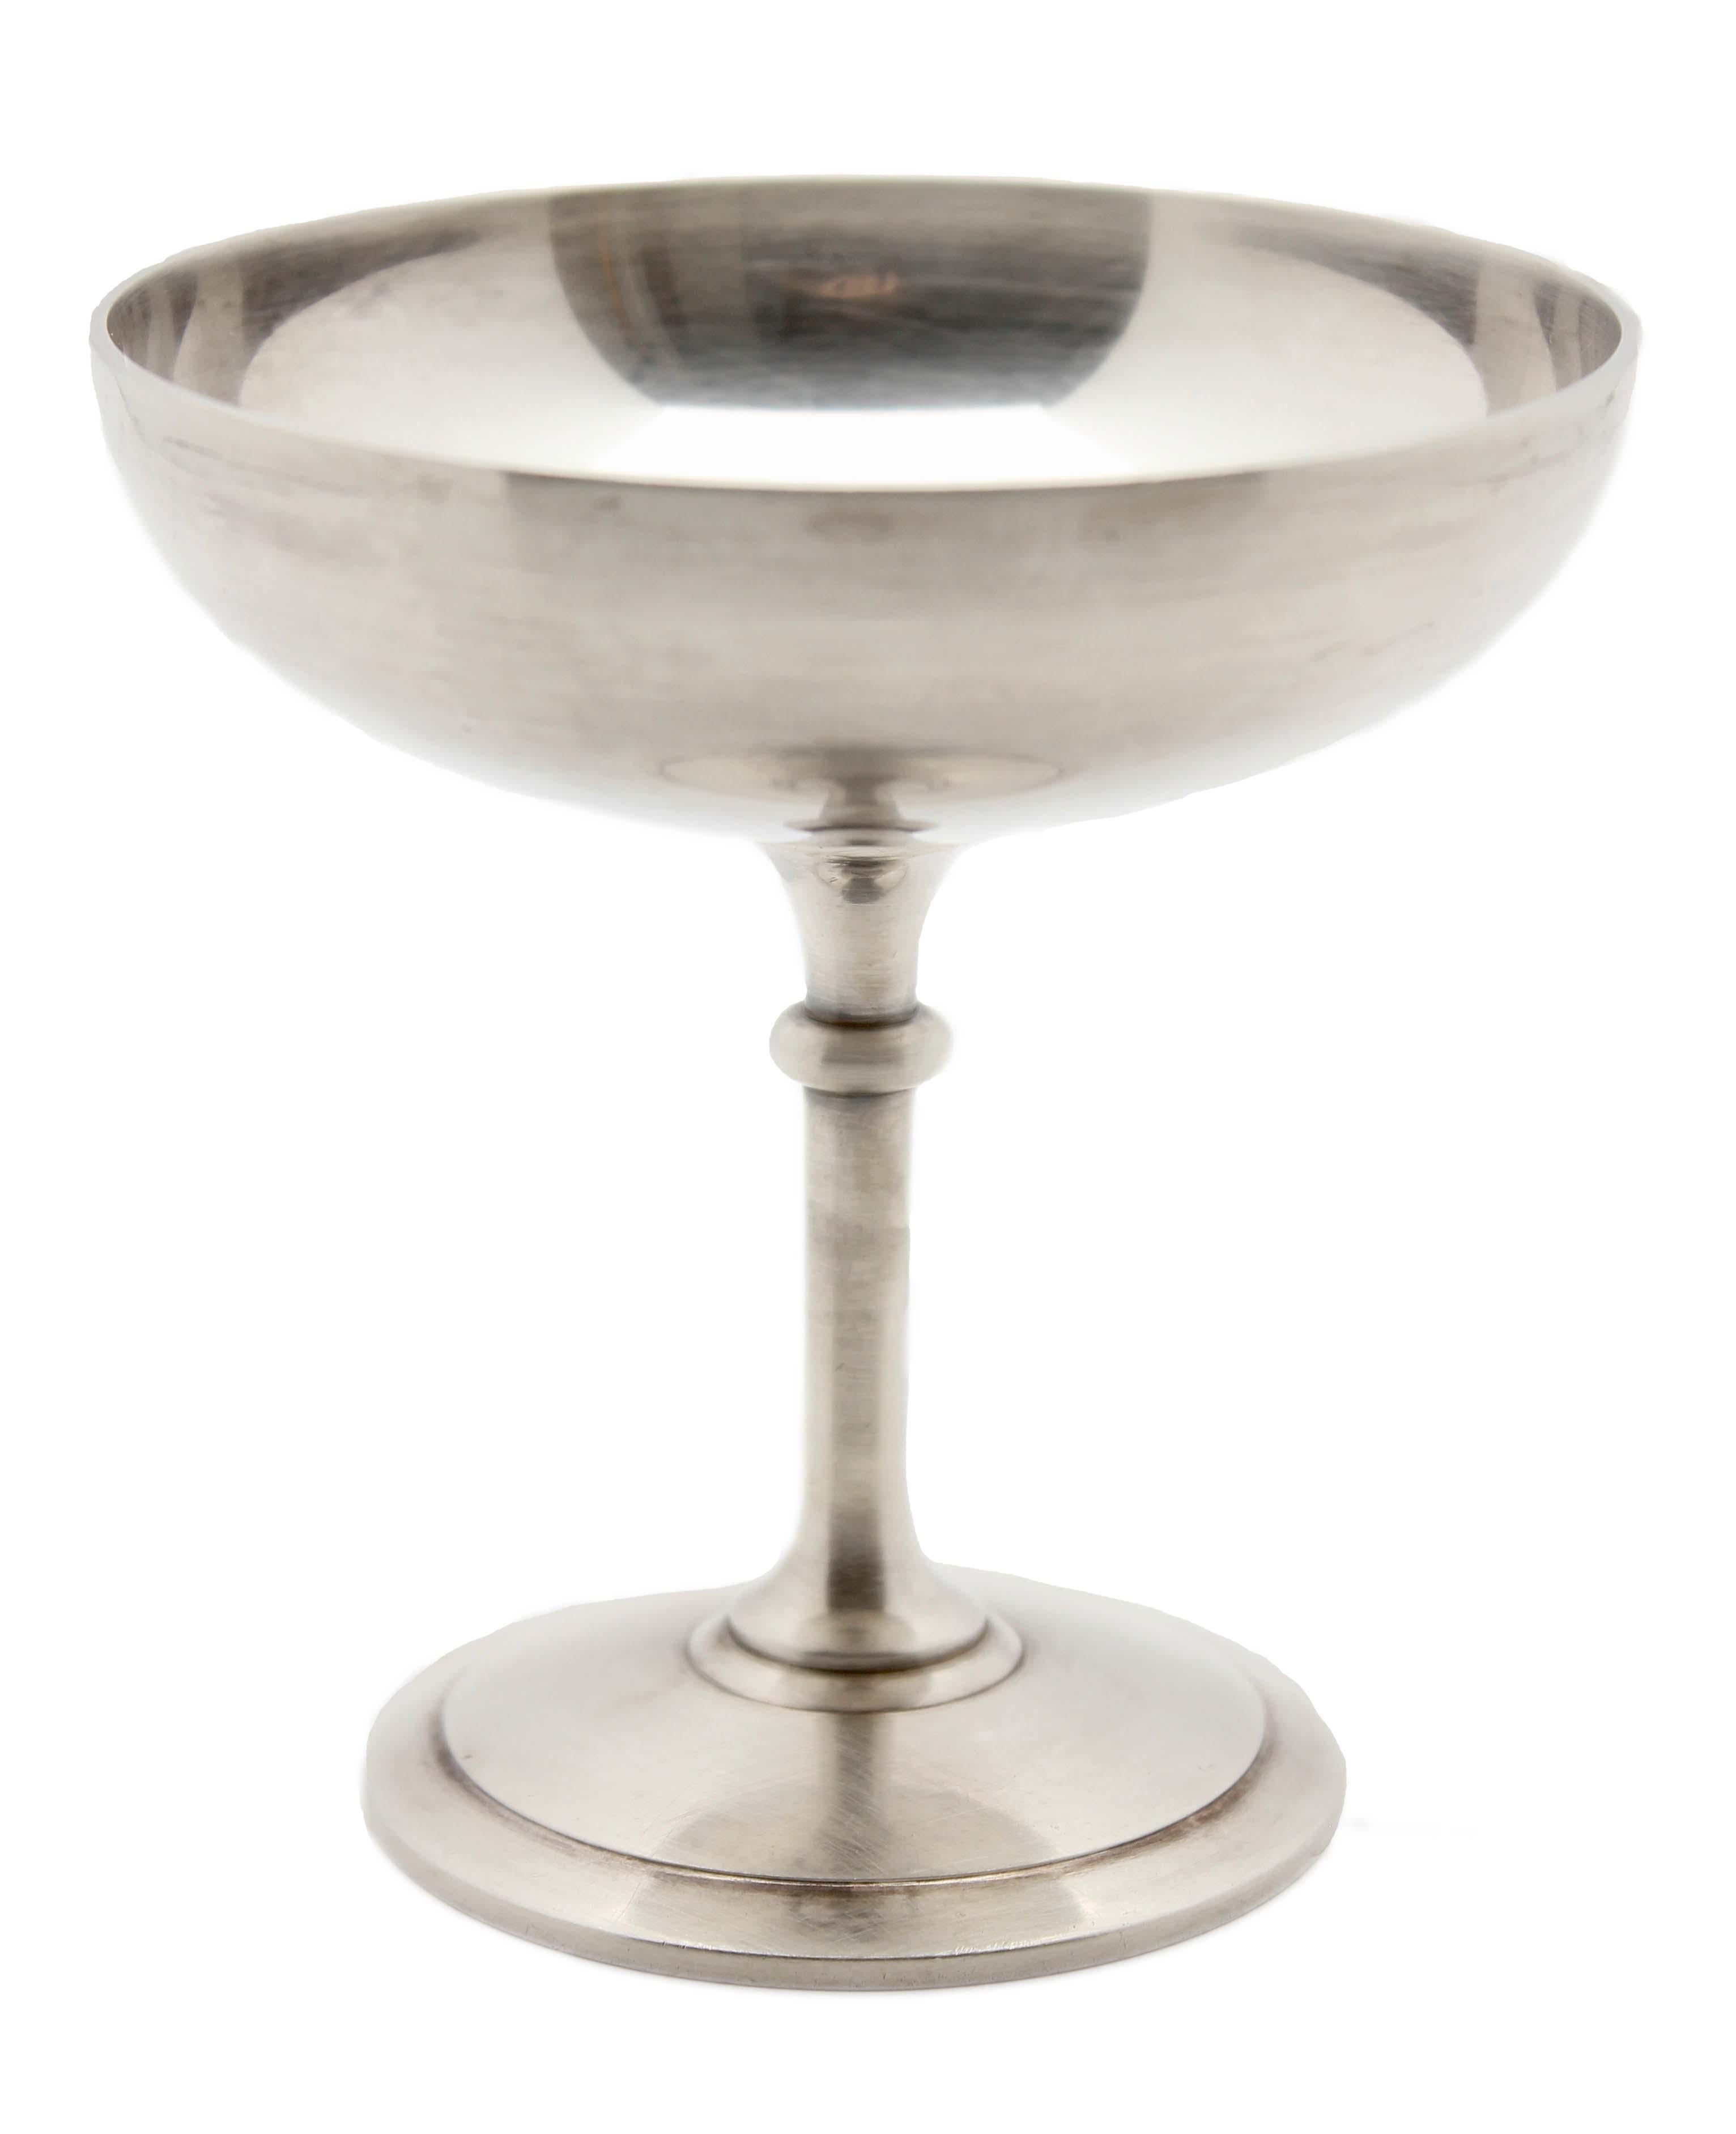 Christofle set of 6 silver plated ice cream bowl

A silver plated ice cream bowl with pedestal base is a welcome addition to the dessert course. 

Material • silver plated
Dimensions • Ø: 9 cm, height 9.5